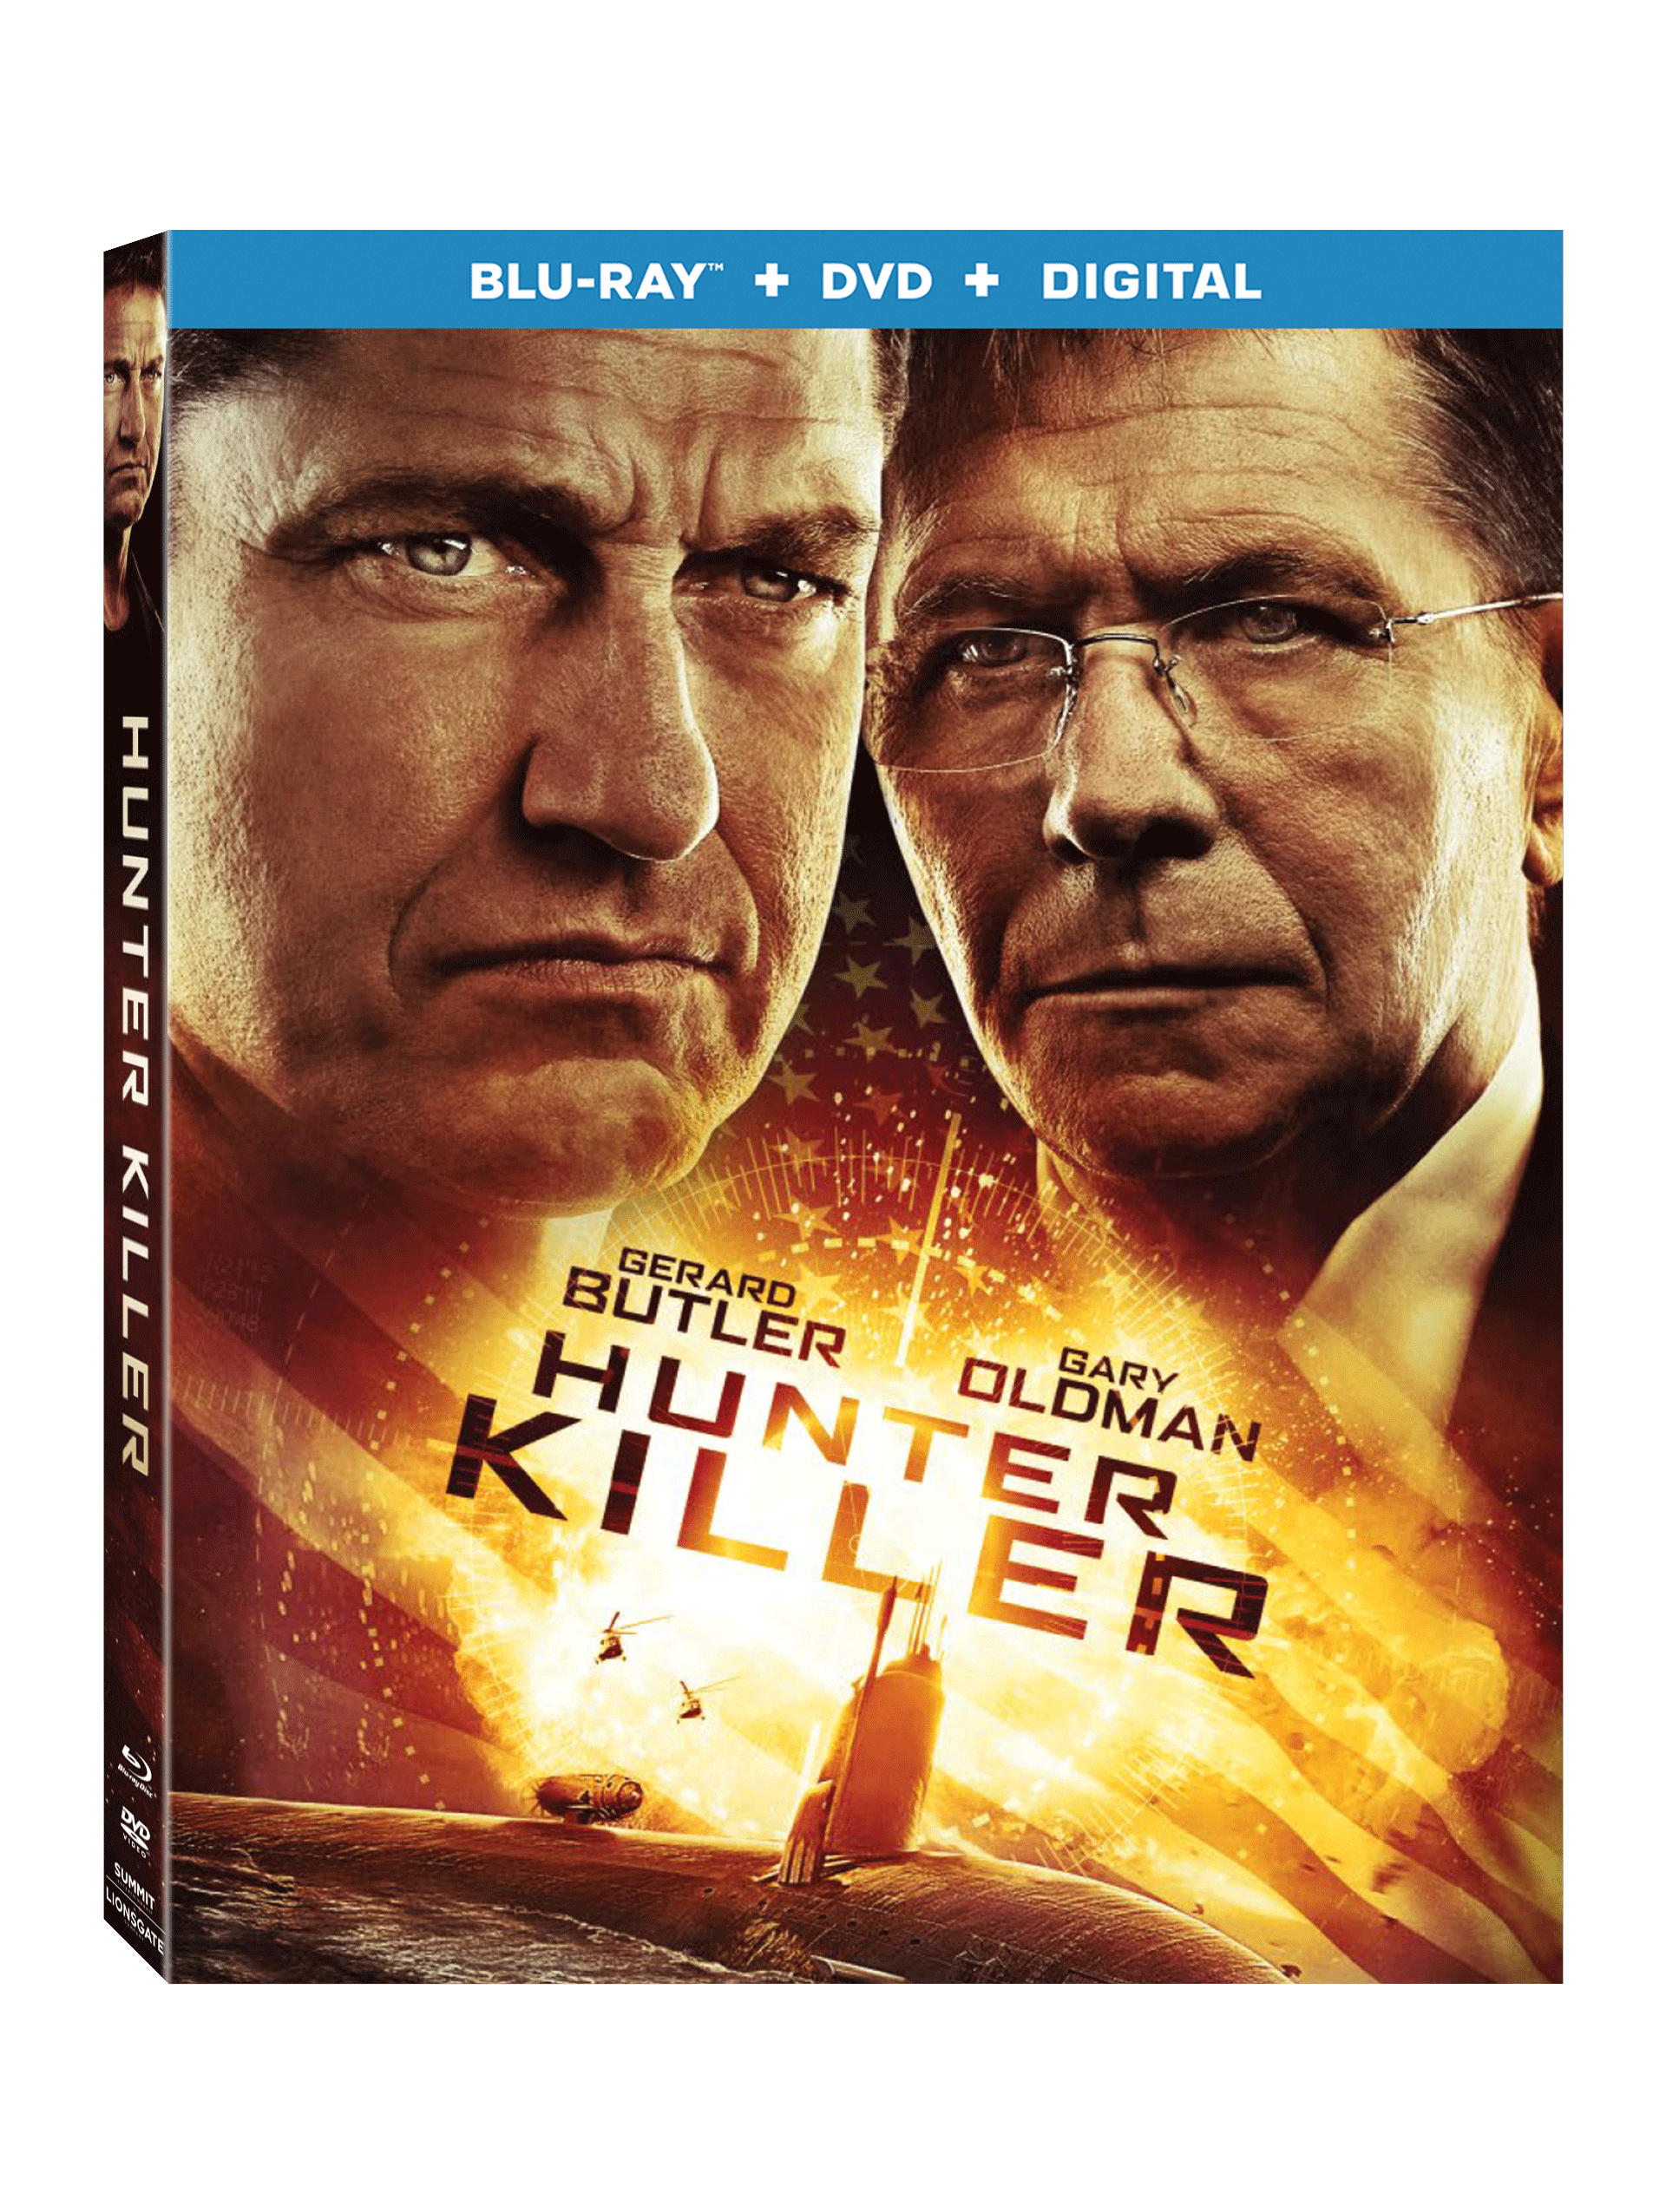 Hunter Killer Blu-Ray Combo Pack cover (Lionsgate Home Entertainment)